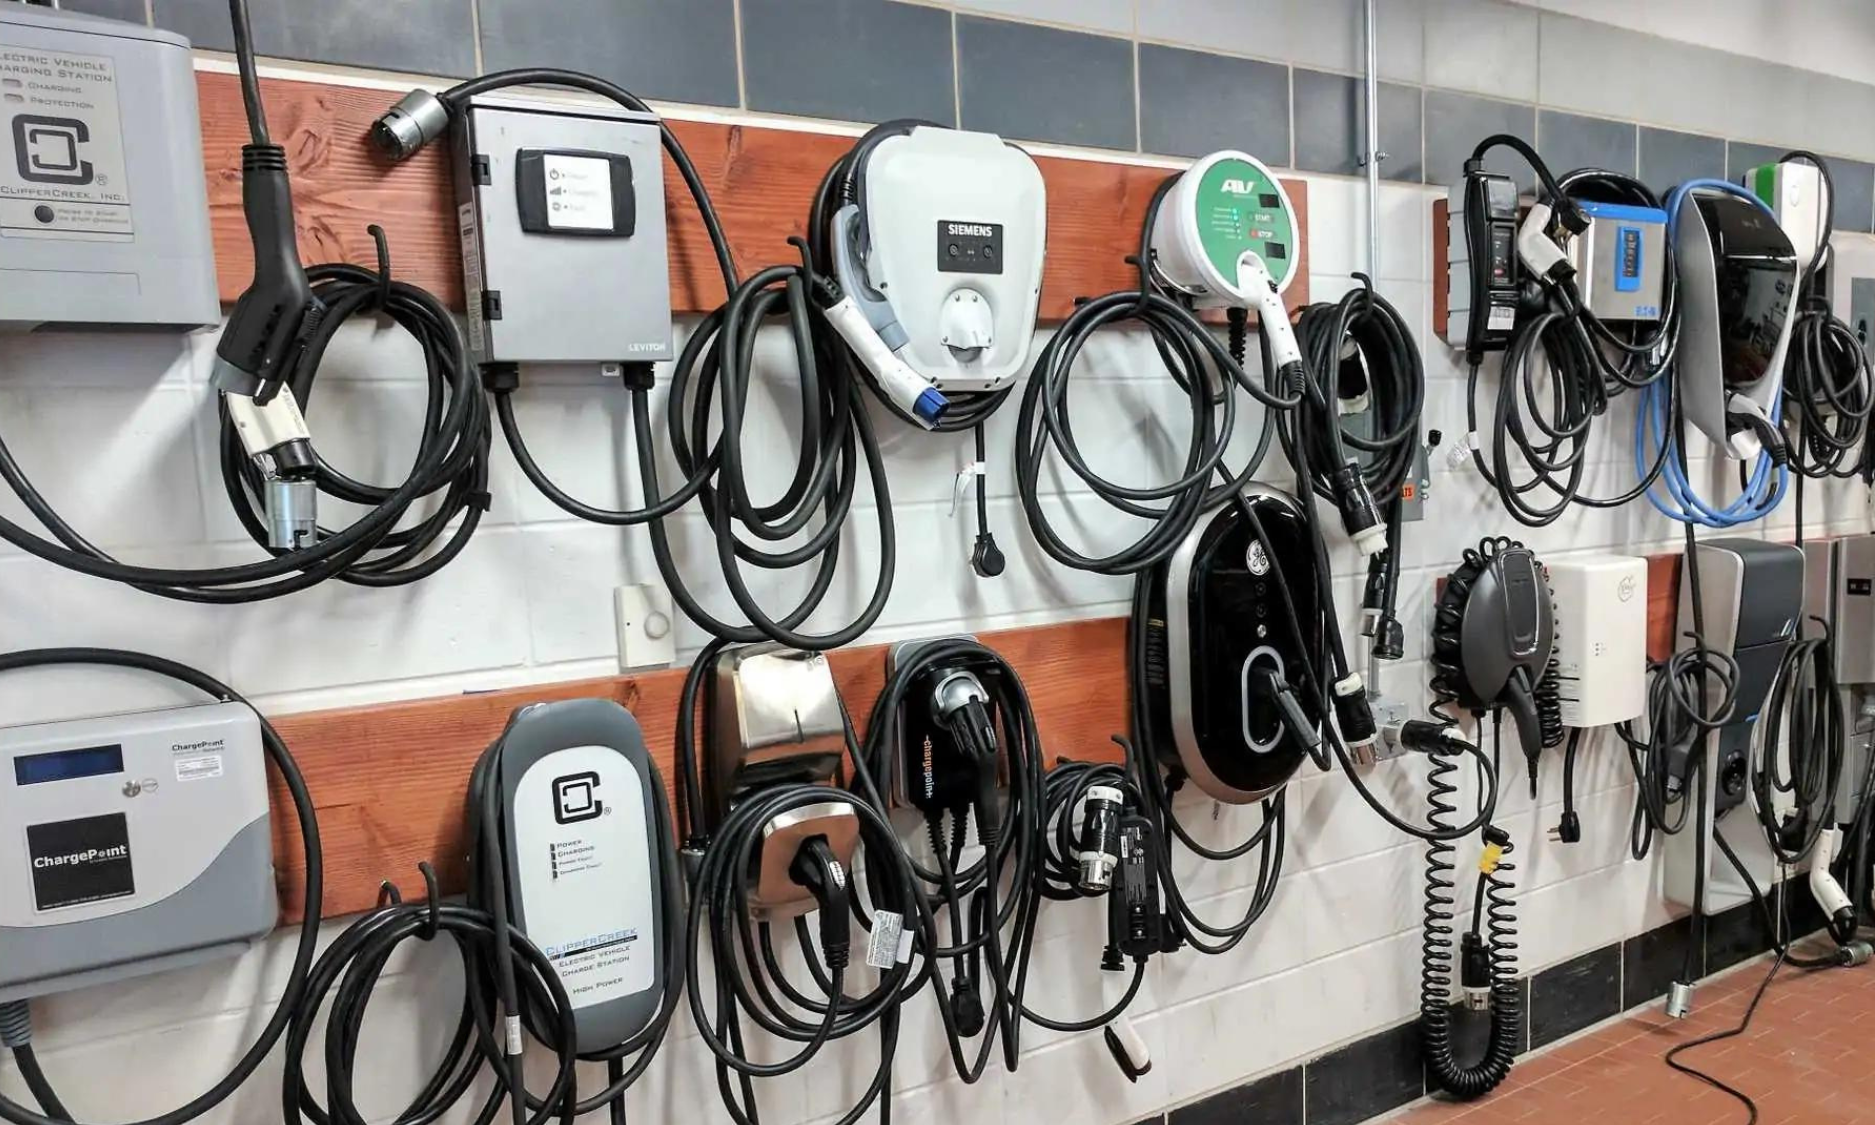 Electric vehicle charging station for home. The charge point